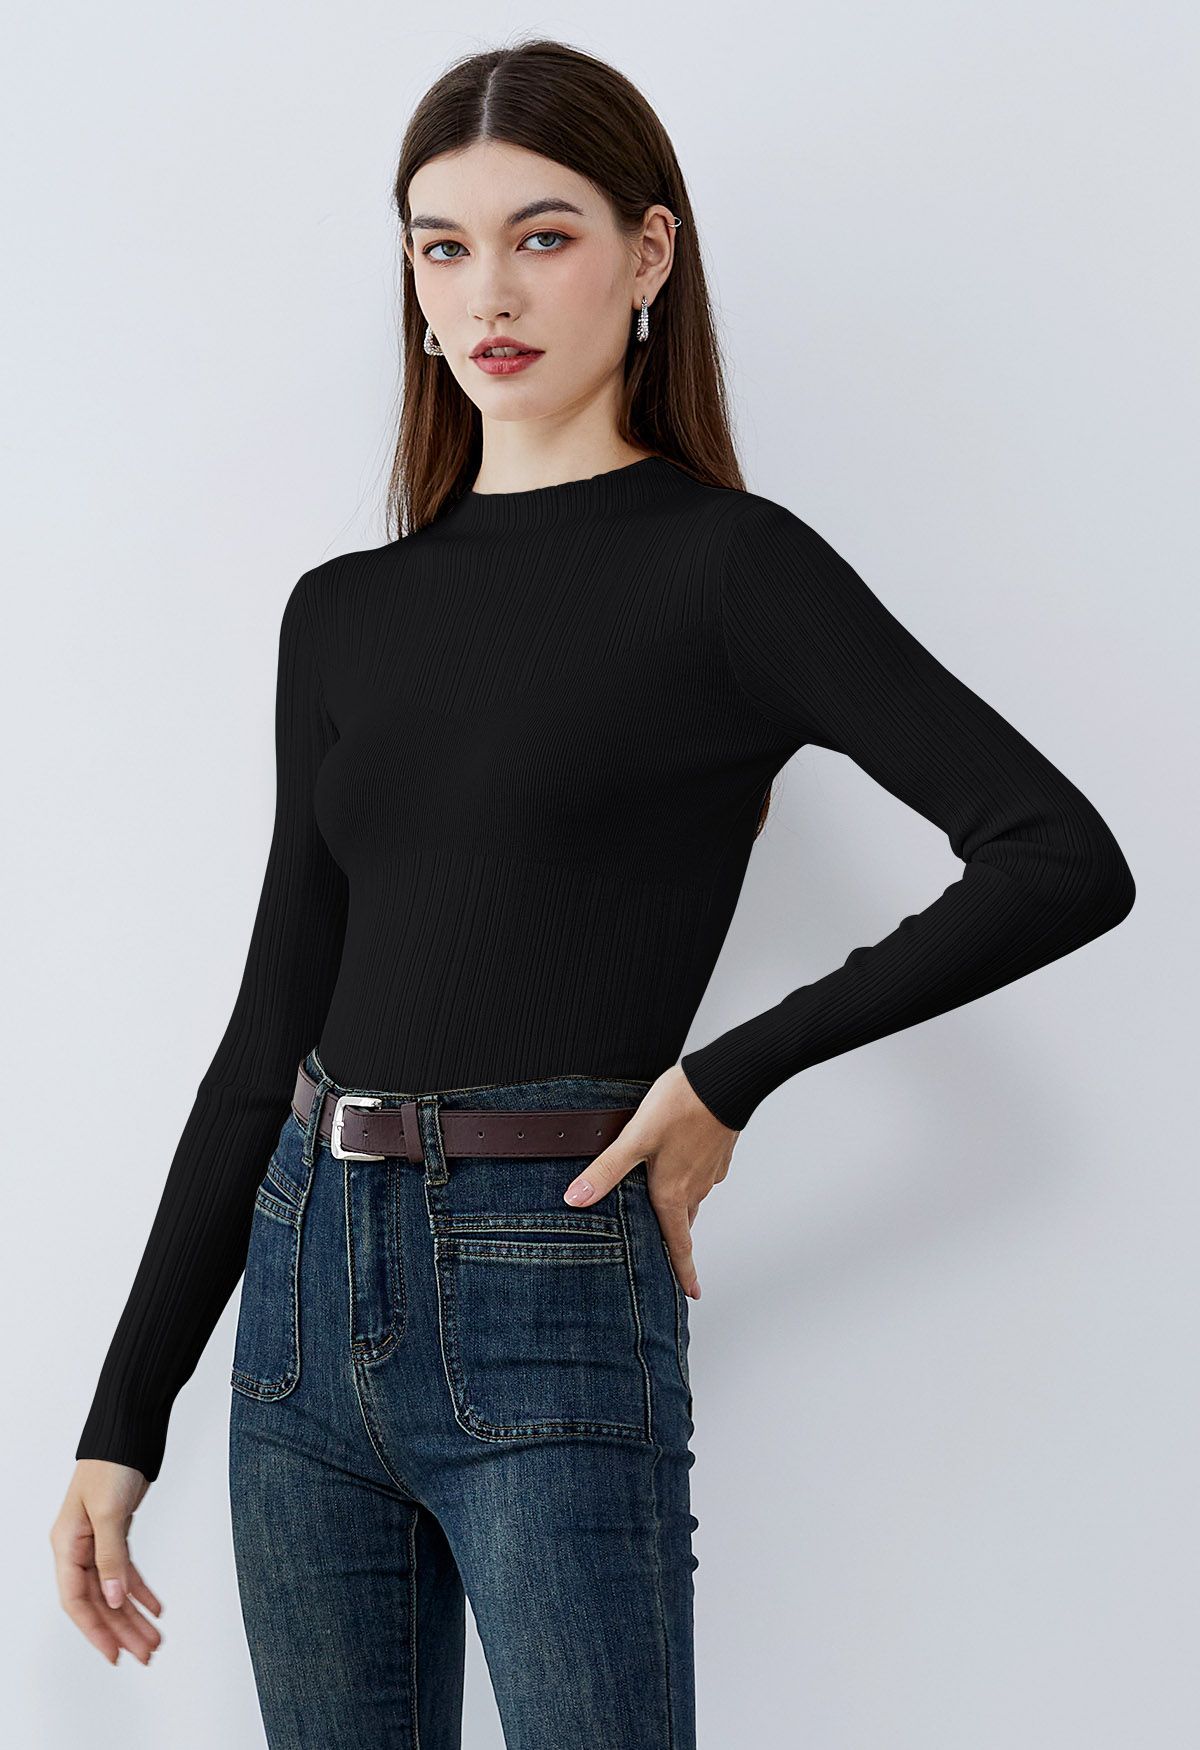 Stripe Texture Fitted Crop Top in Black | Chicwish